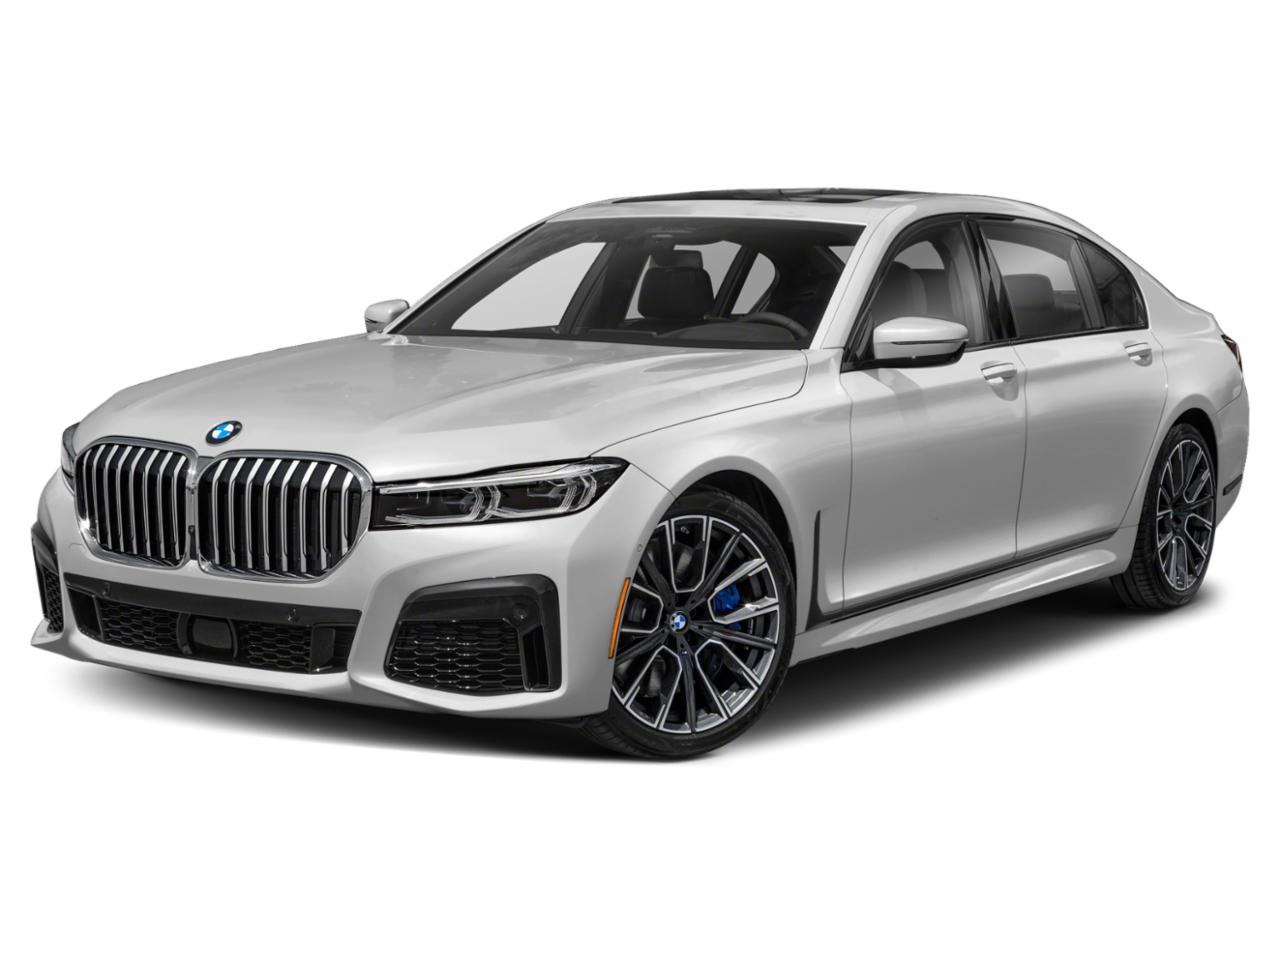  BMW 750I-Xdrive oem parts and accessories on sale